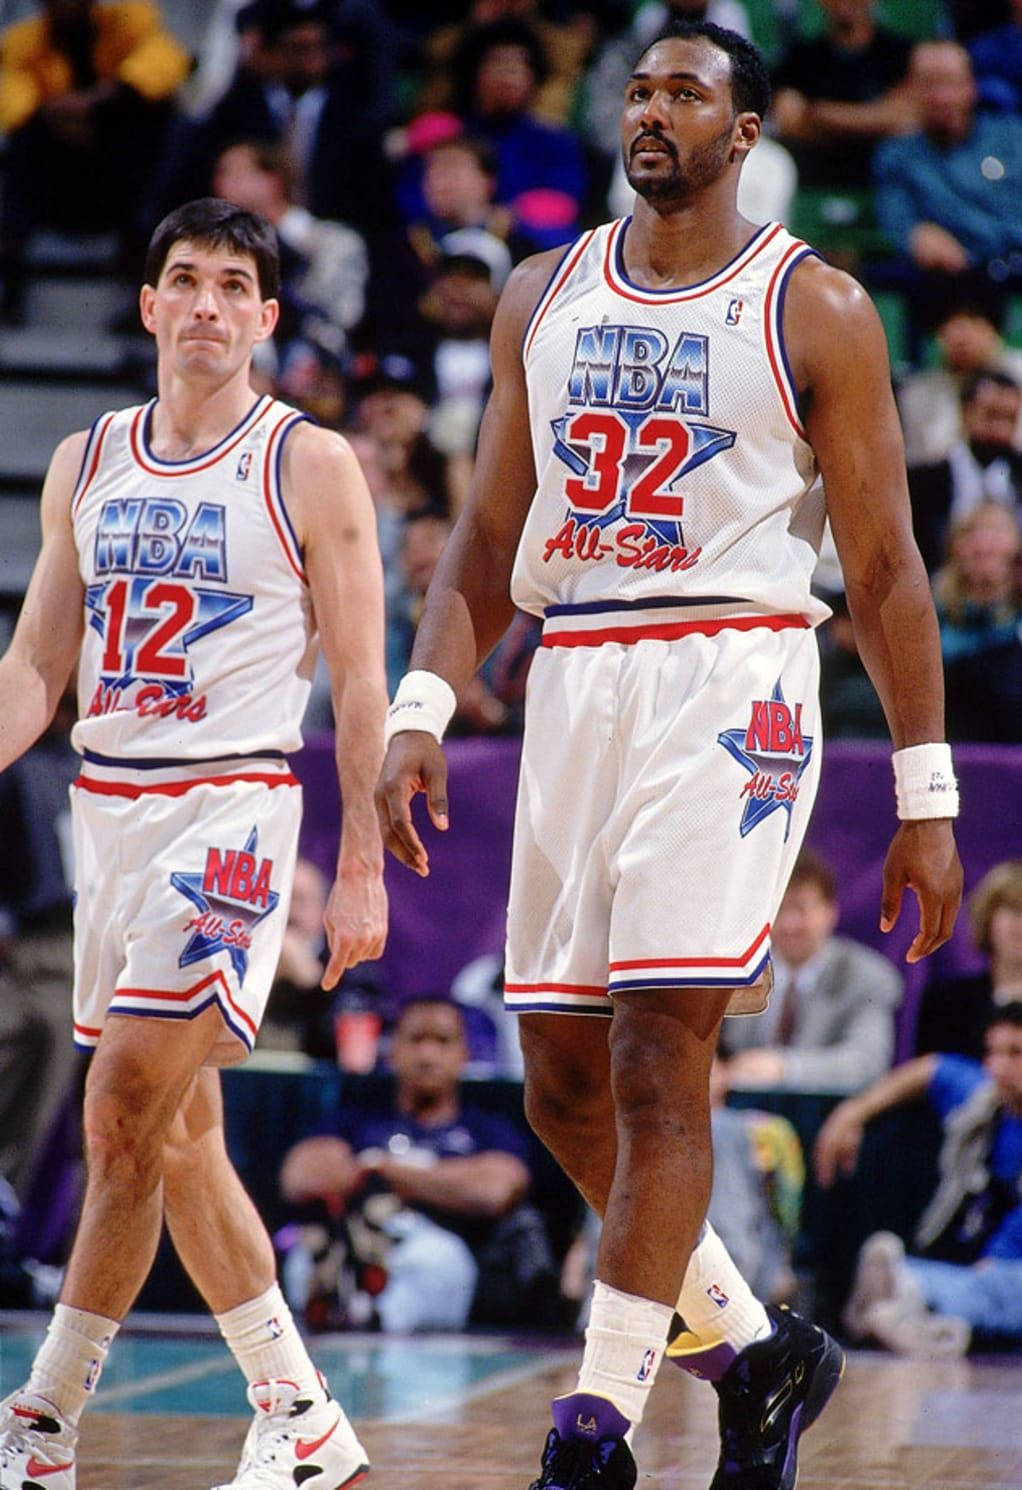 Denstora Karl Malone Och John Stockton. (note: This May Not Make Sense As A Standalone Sentence For Wallpaper, But It Is A Direct Translation Of The Given Phrase.) Wallpaper